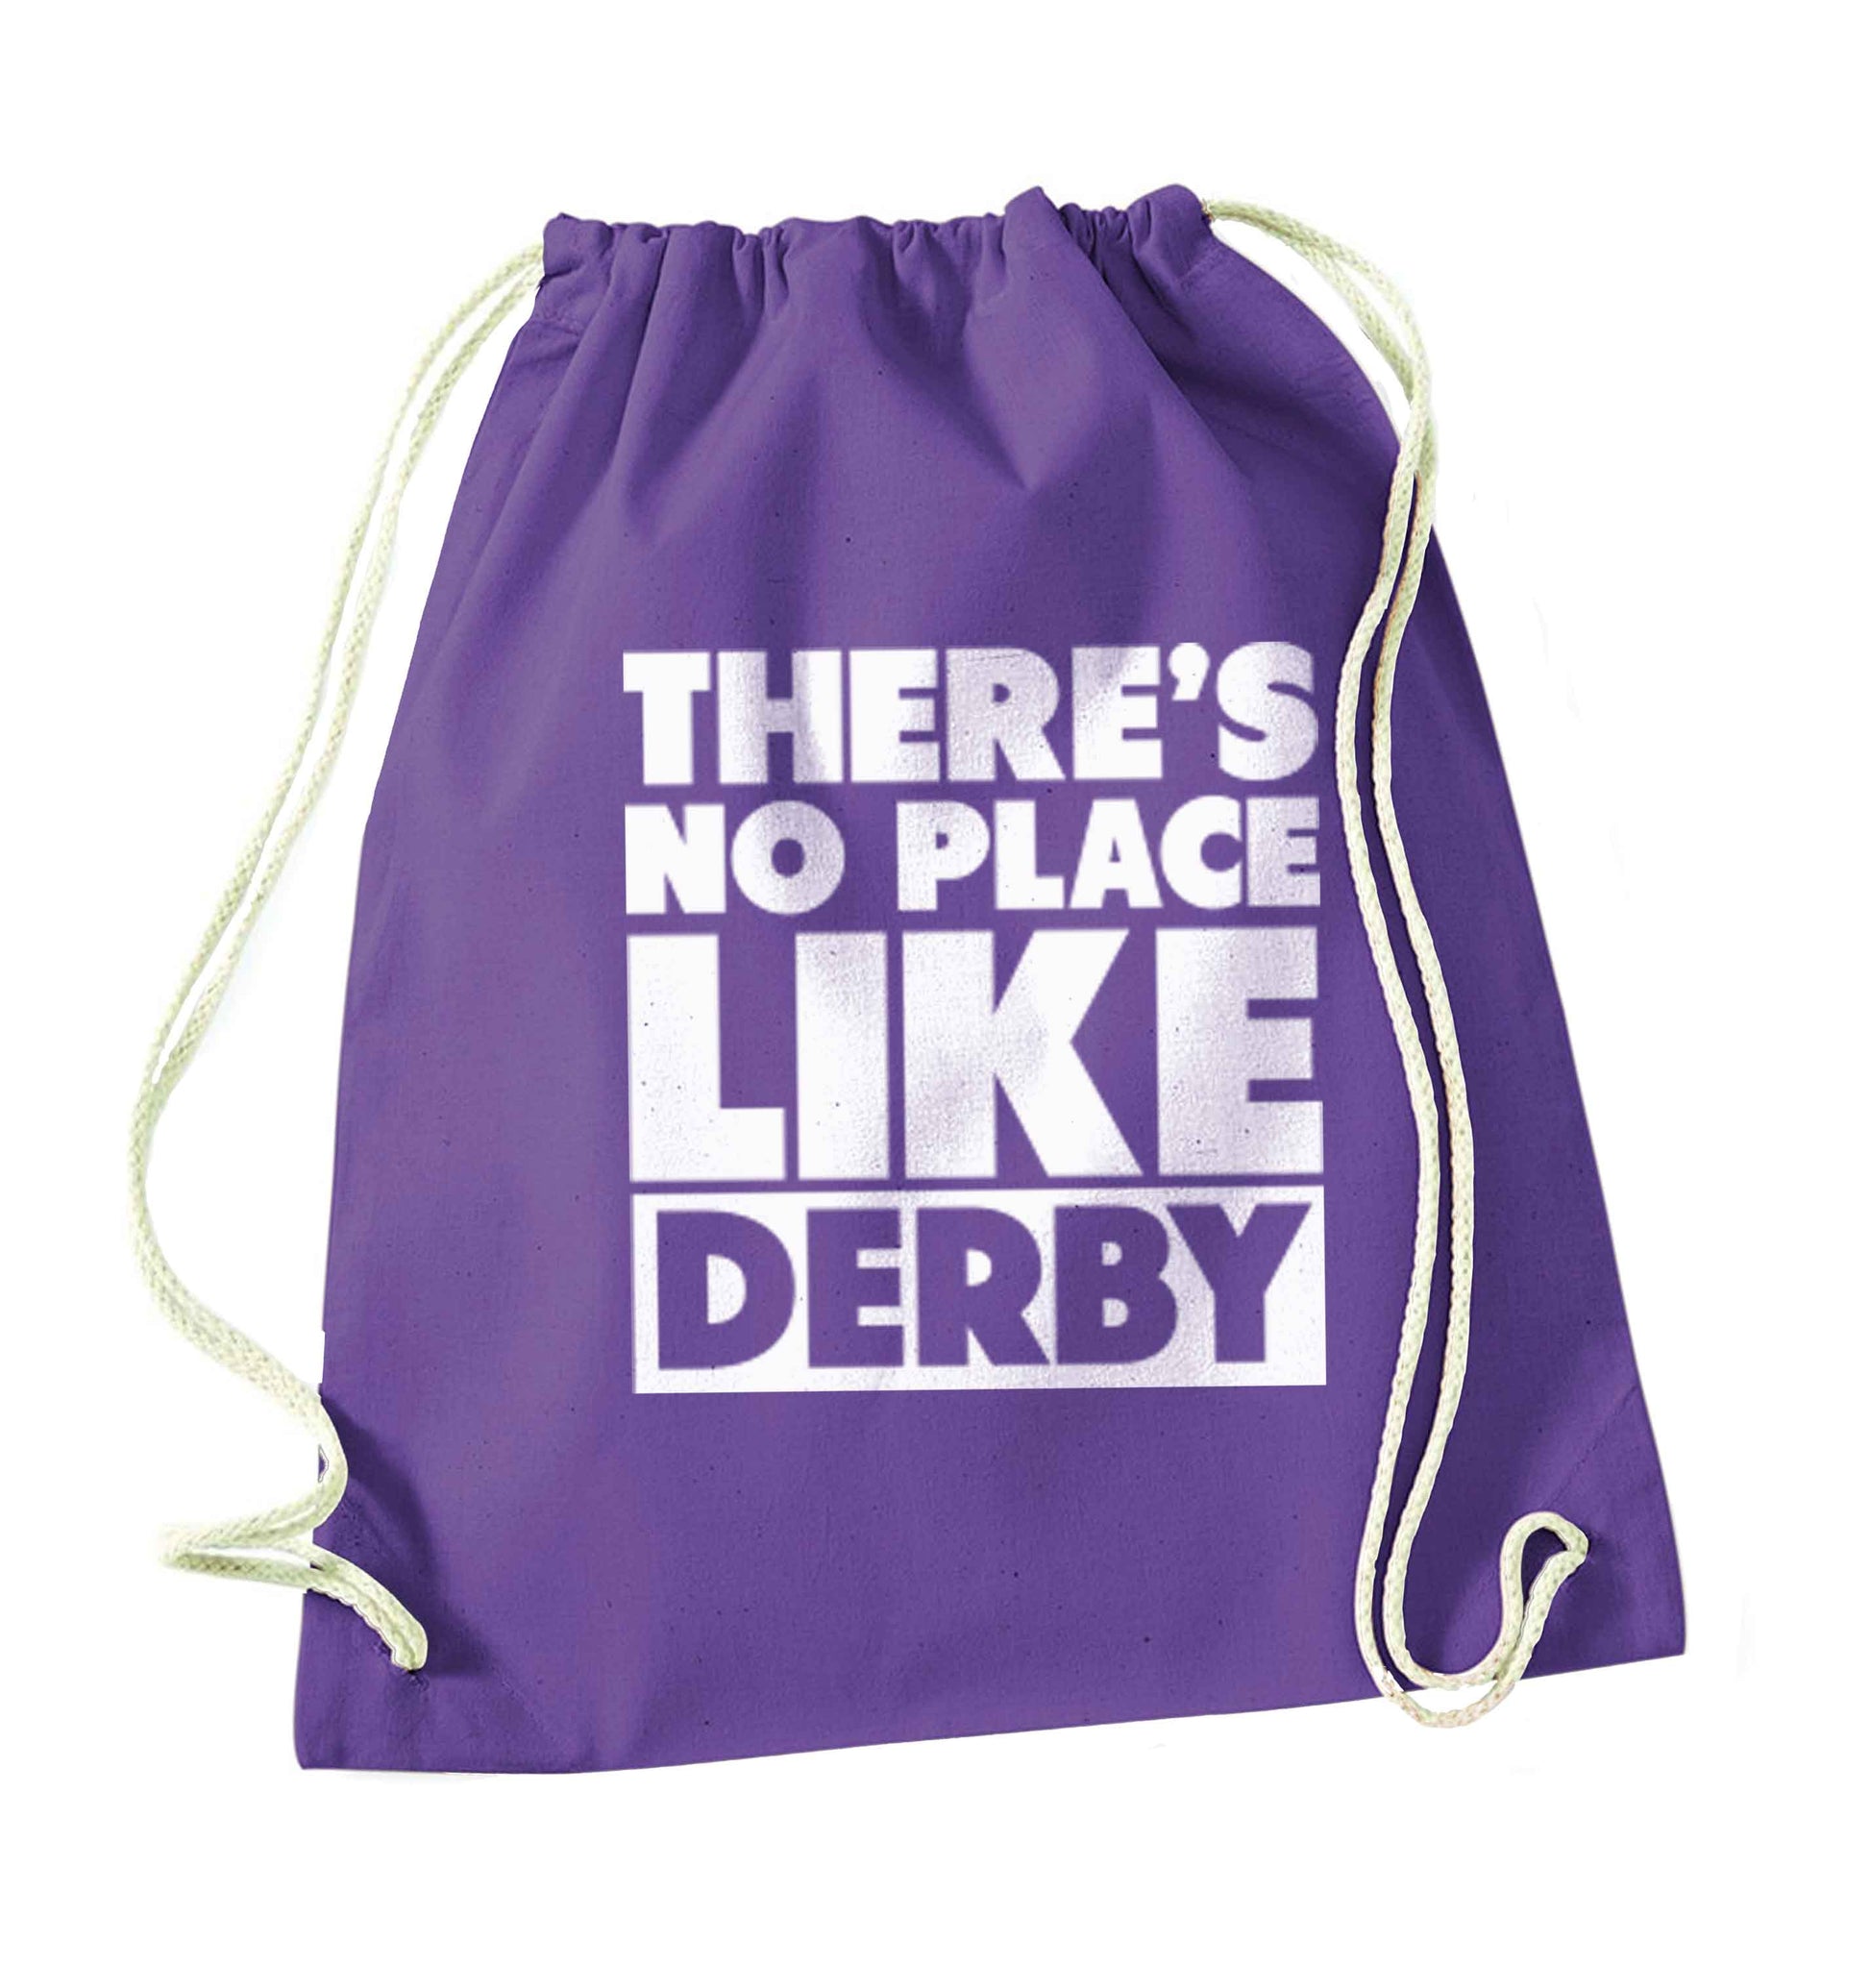 There's no place like Derby purple drawstring bag